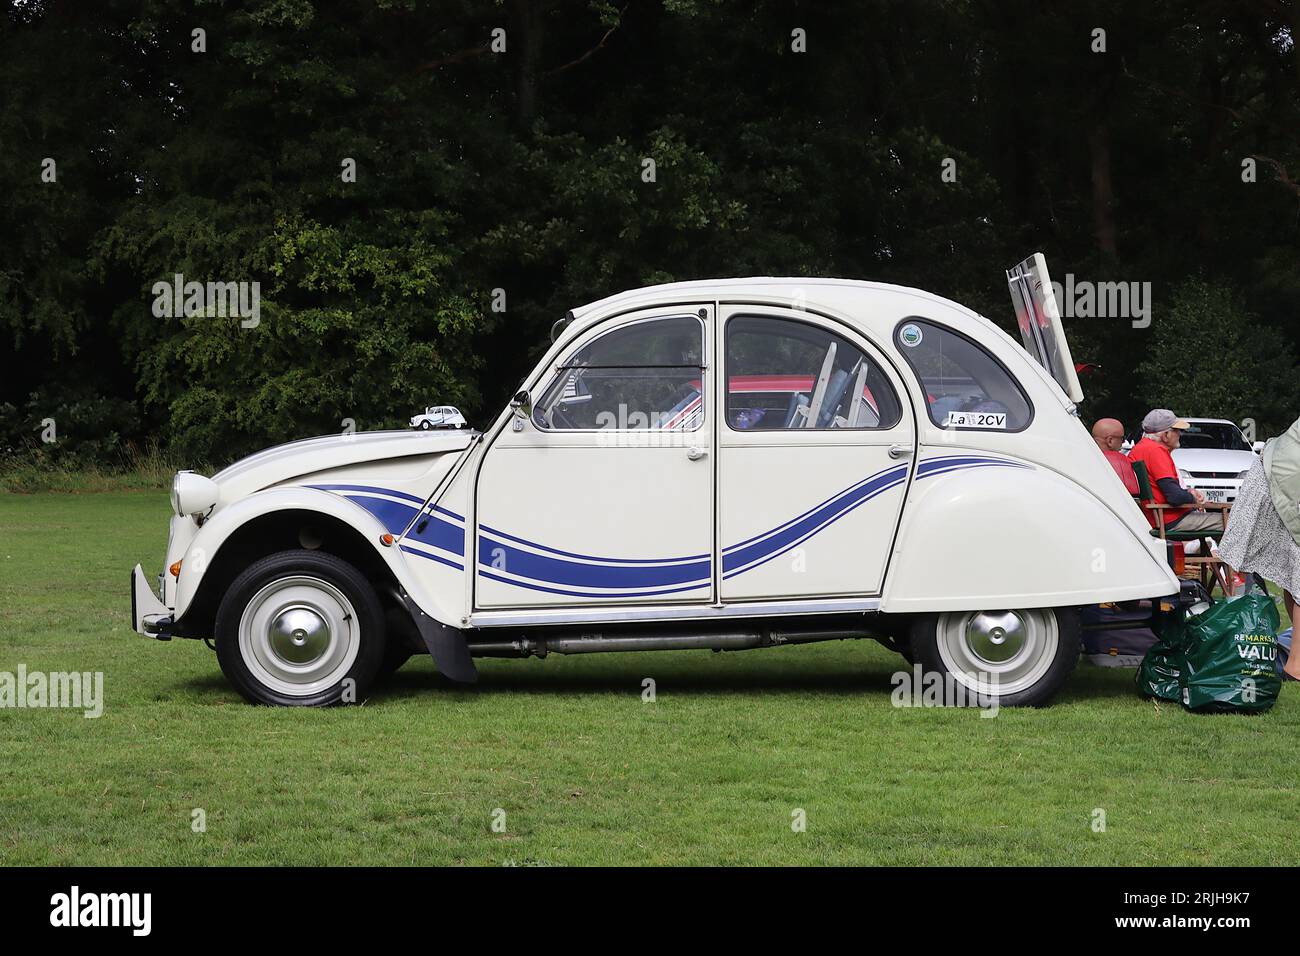 Citroën 2CV Beachcomer special limited edition model, also branded as France 3 and Transat in other European markets such as Holland and France. Stock Photo